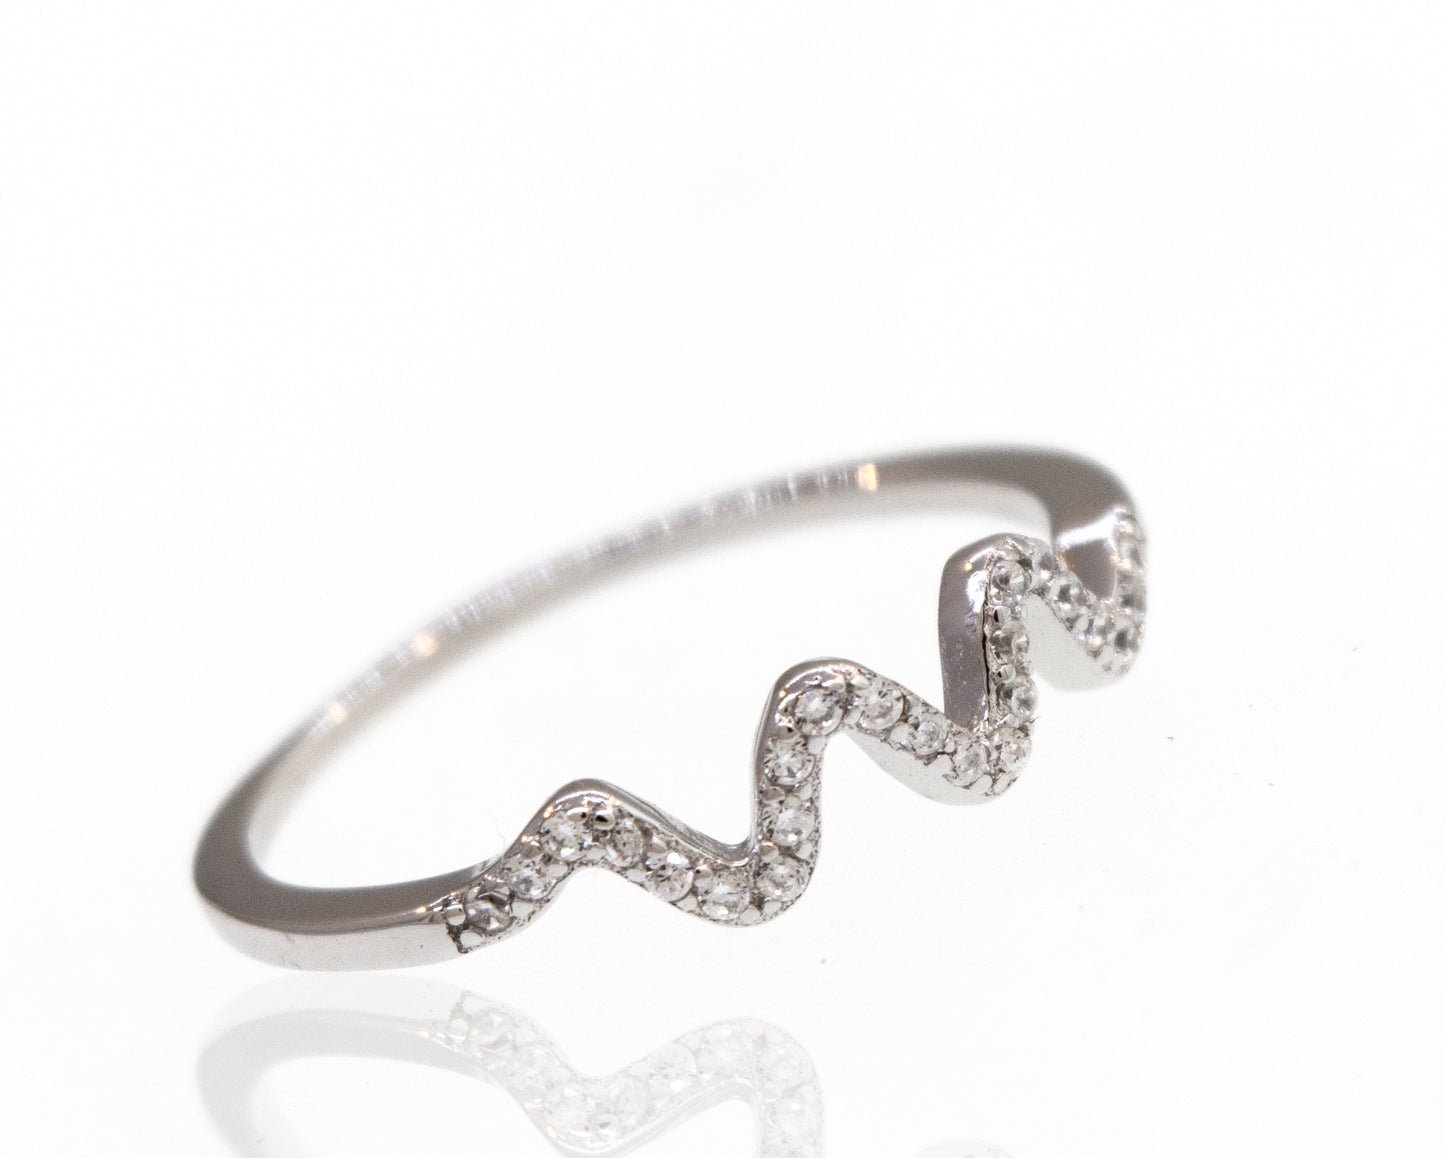 An elegant Wavy Pave Band engagement ring with diamonds on it.